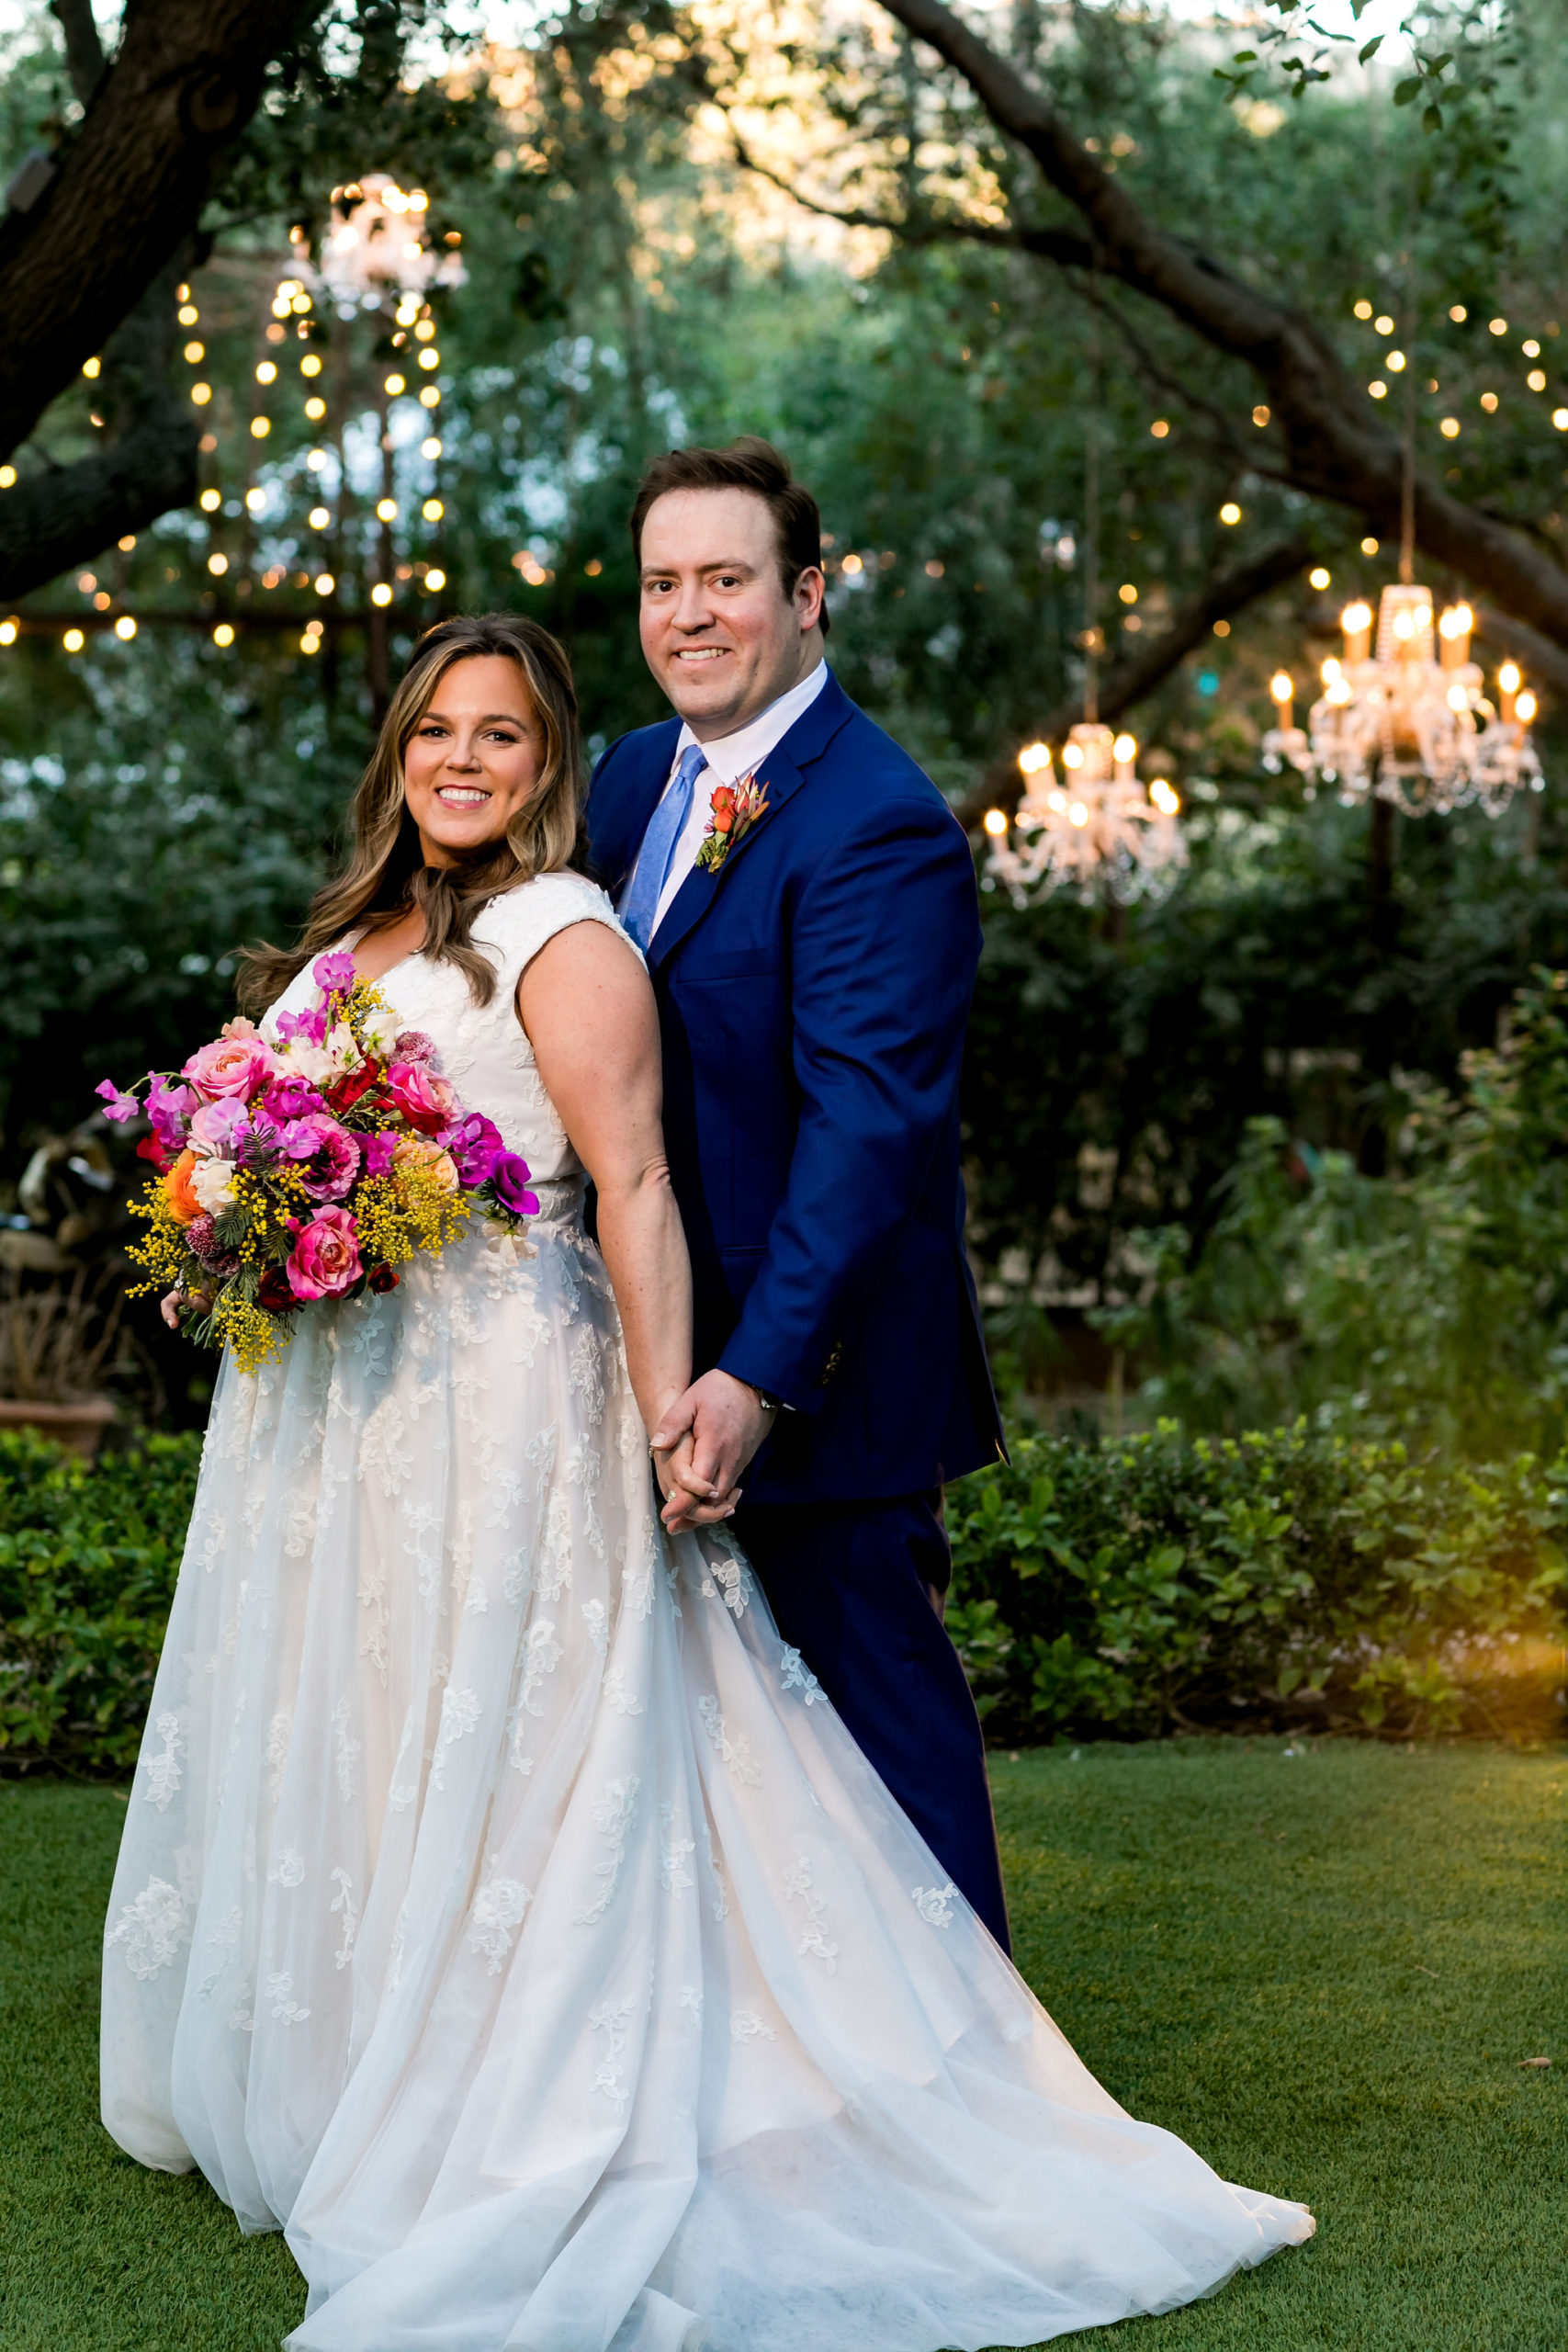 bride in v-neck wedding dress with lace overlay holding a bright purple and pink bouquet stands with groom in bright blue suit and tie